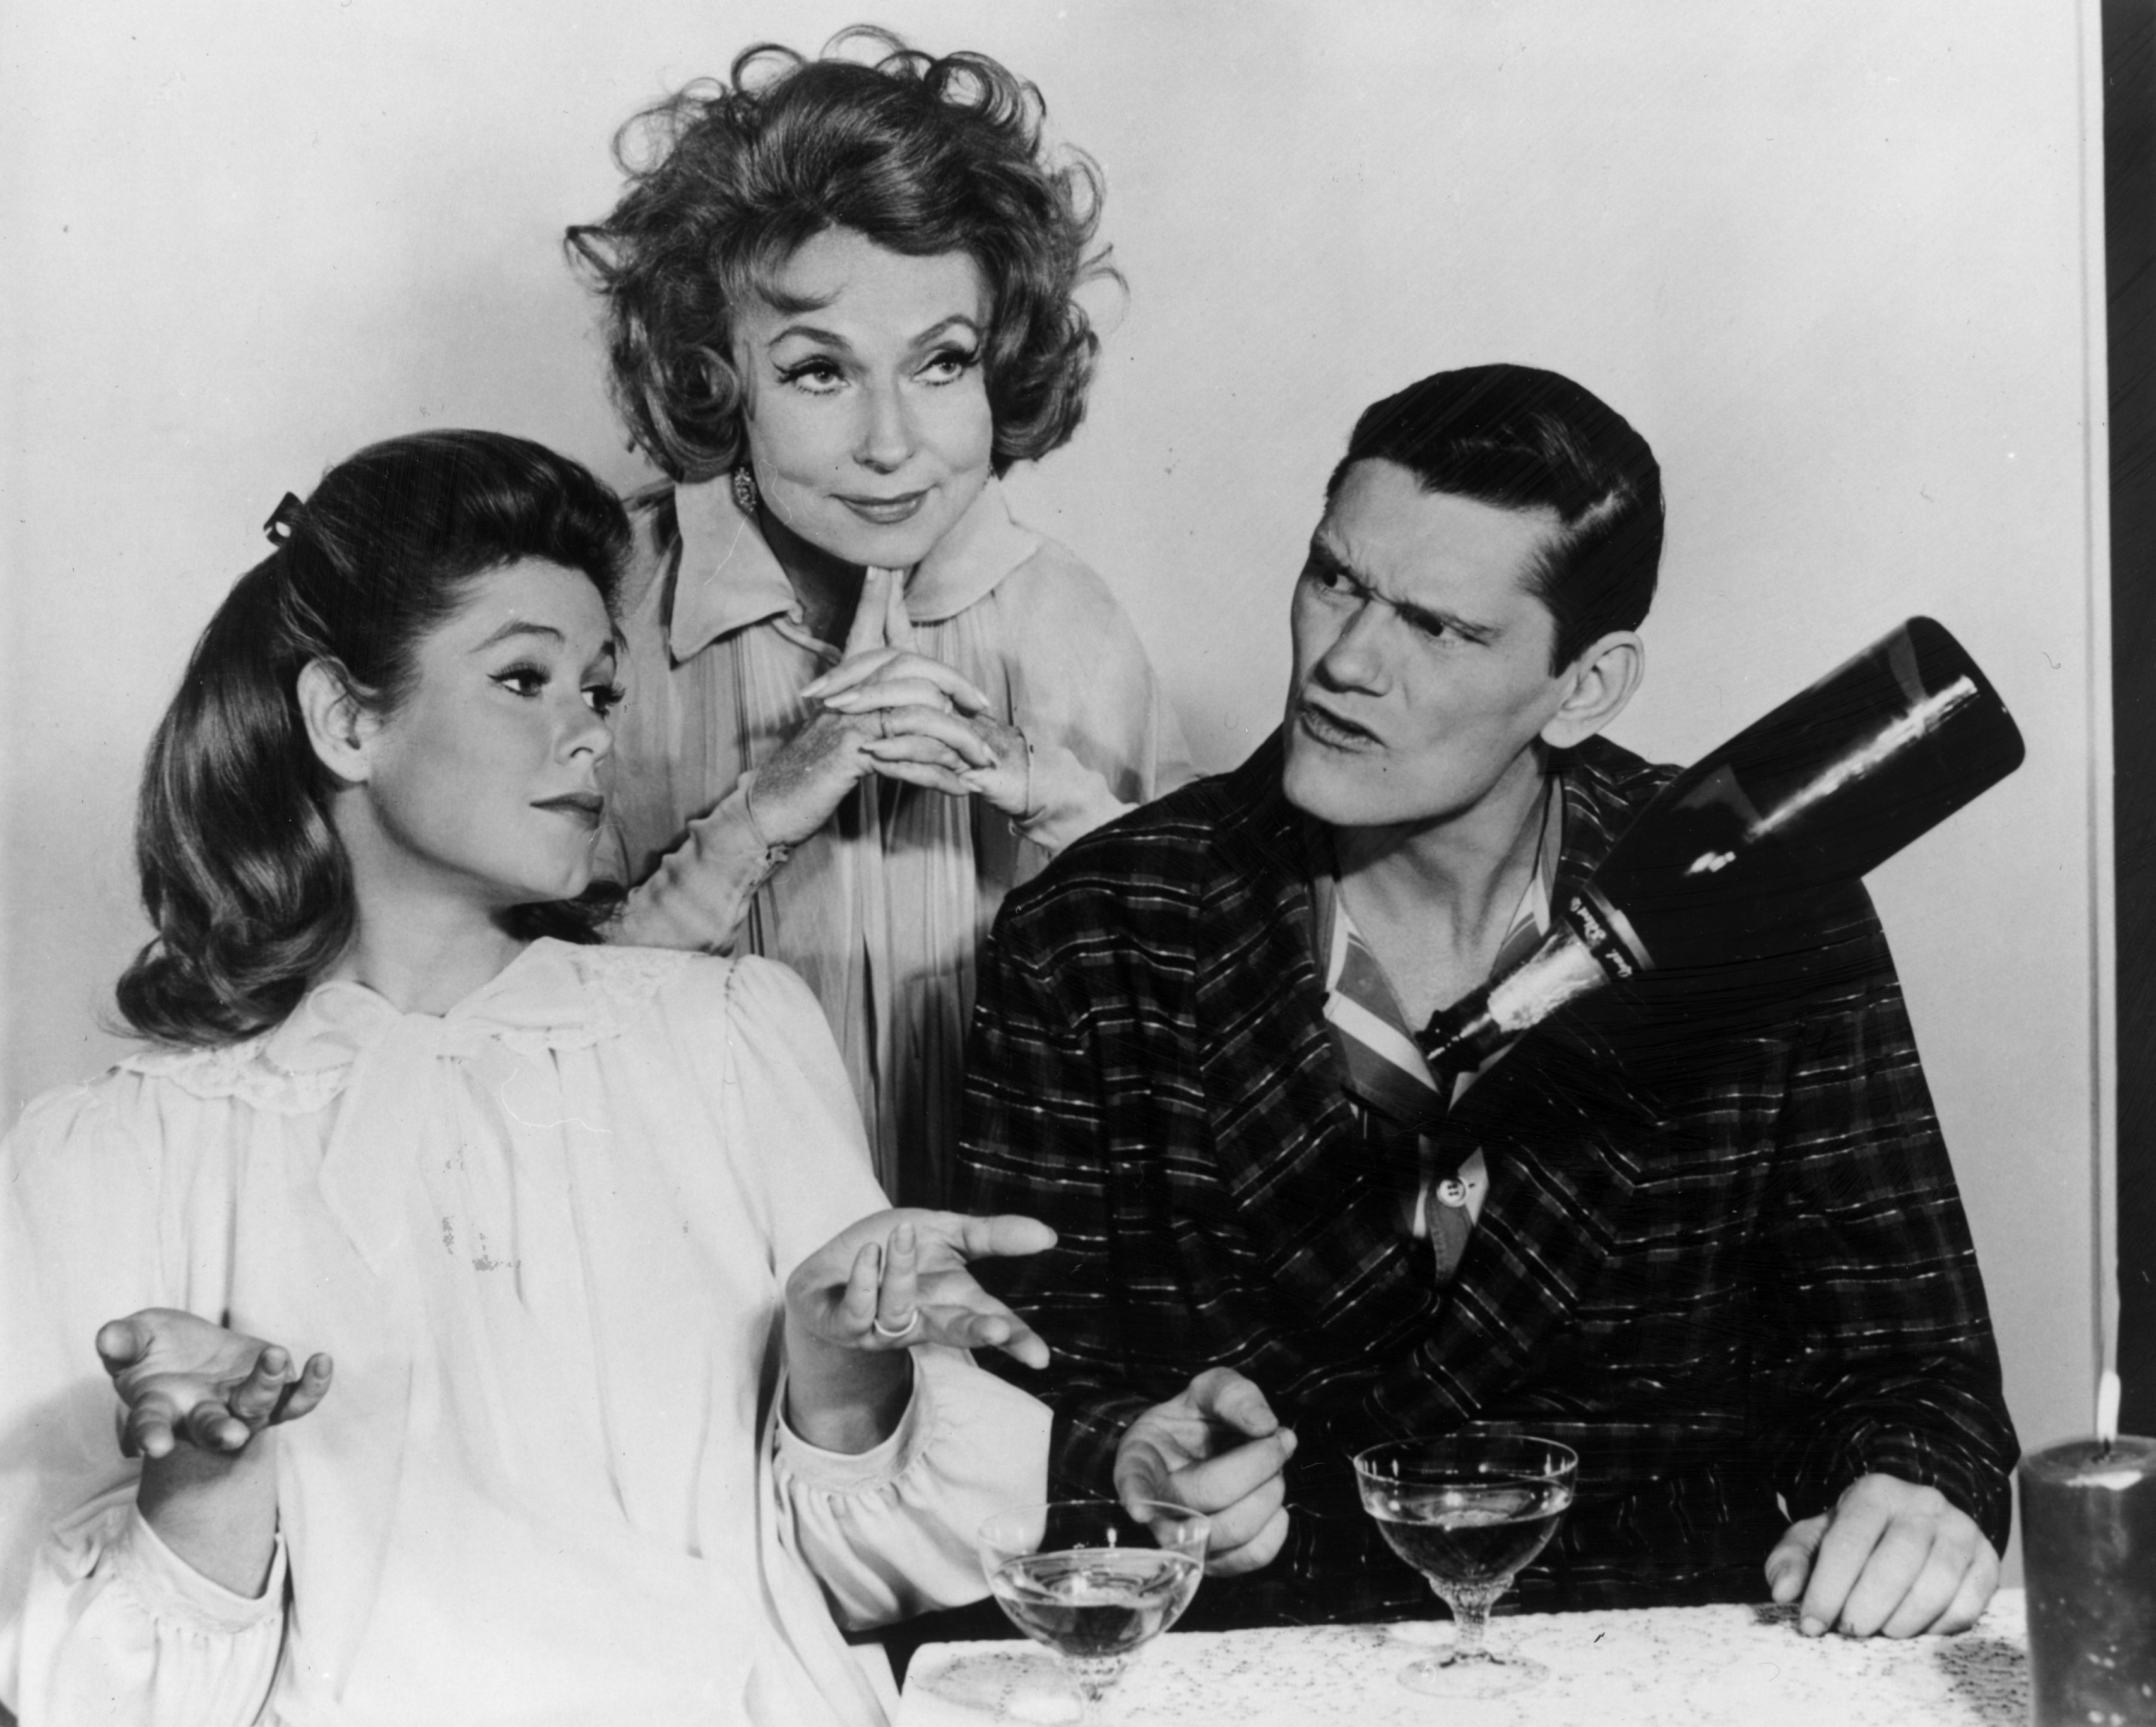 'Bewitched' actor Elizabeth Montgomery in a nightgown, Agnes Morehead in a witch outfit, and Dick York in a robe in a scene from the ABC sitcom.